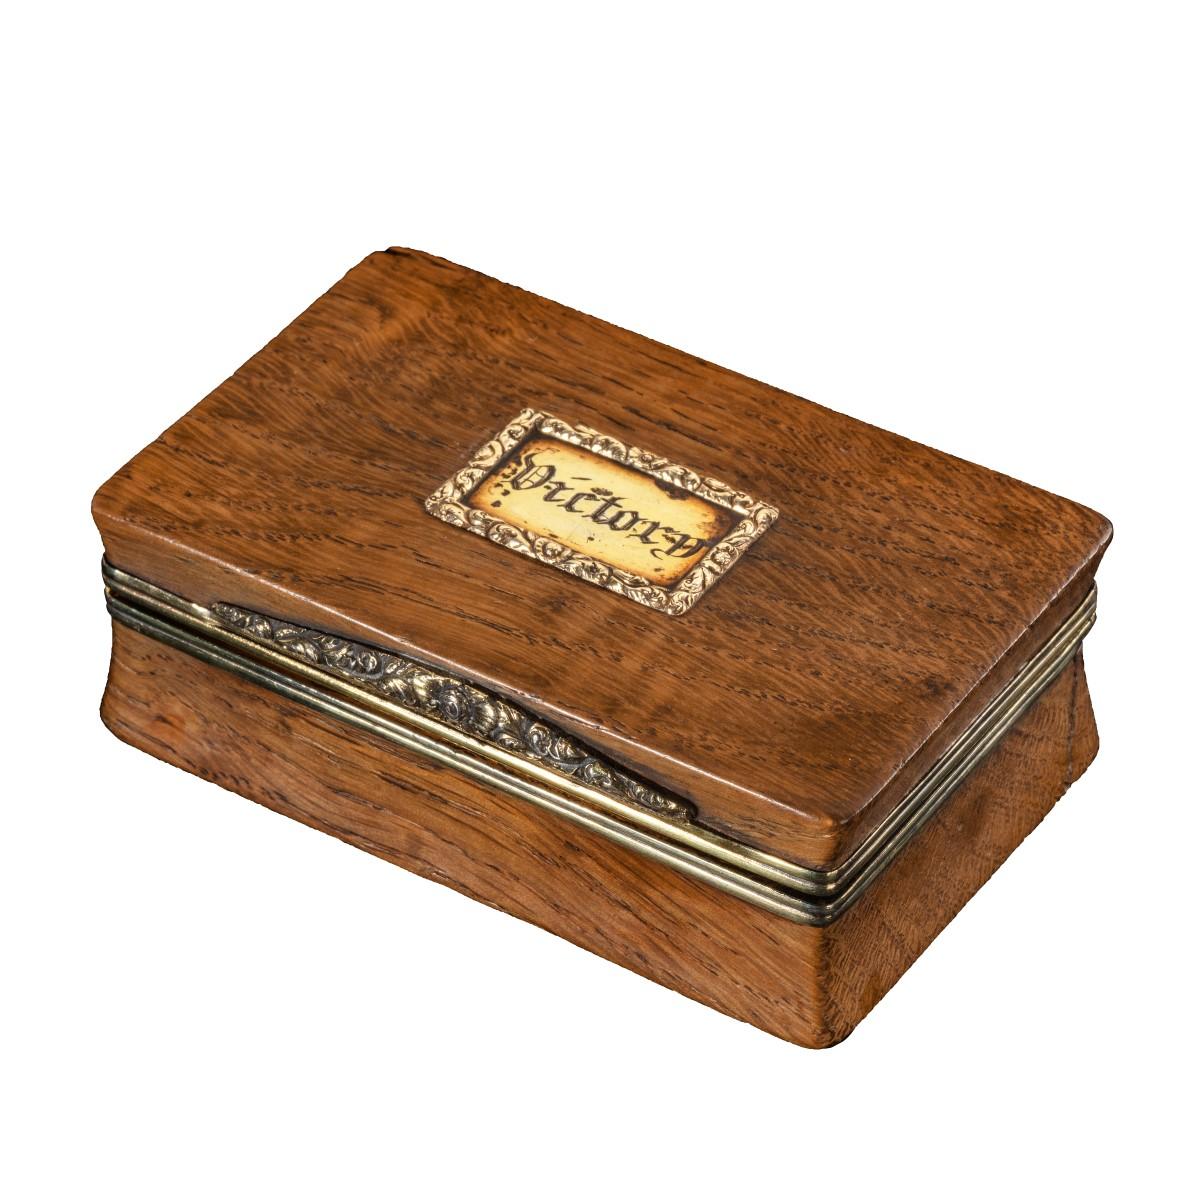 This small trinket box is of rectangular form with a hinged lid and applied with a silver gilt tablet engraved
‘Victory’ within a foliate border. With fully lined gilt interior. 

Hallmarked twice for 1819.

After the Battle of Trafalgar